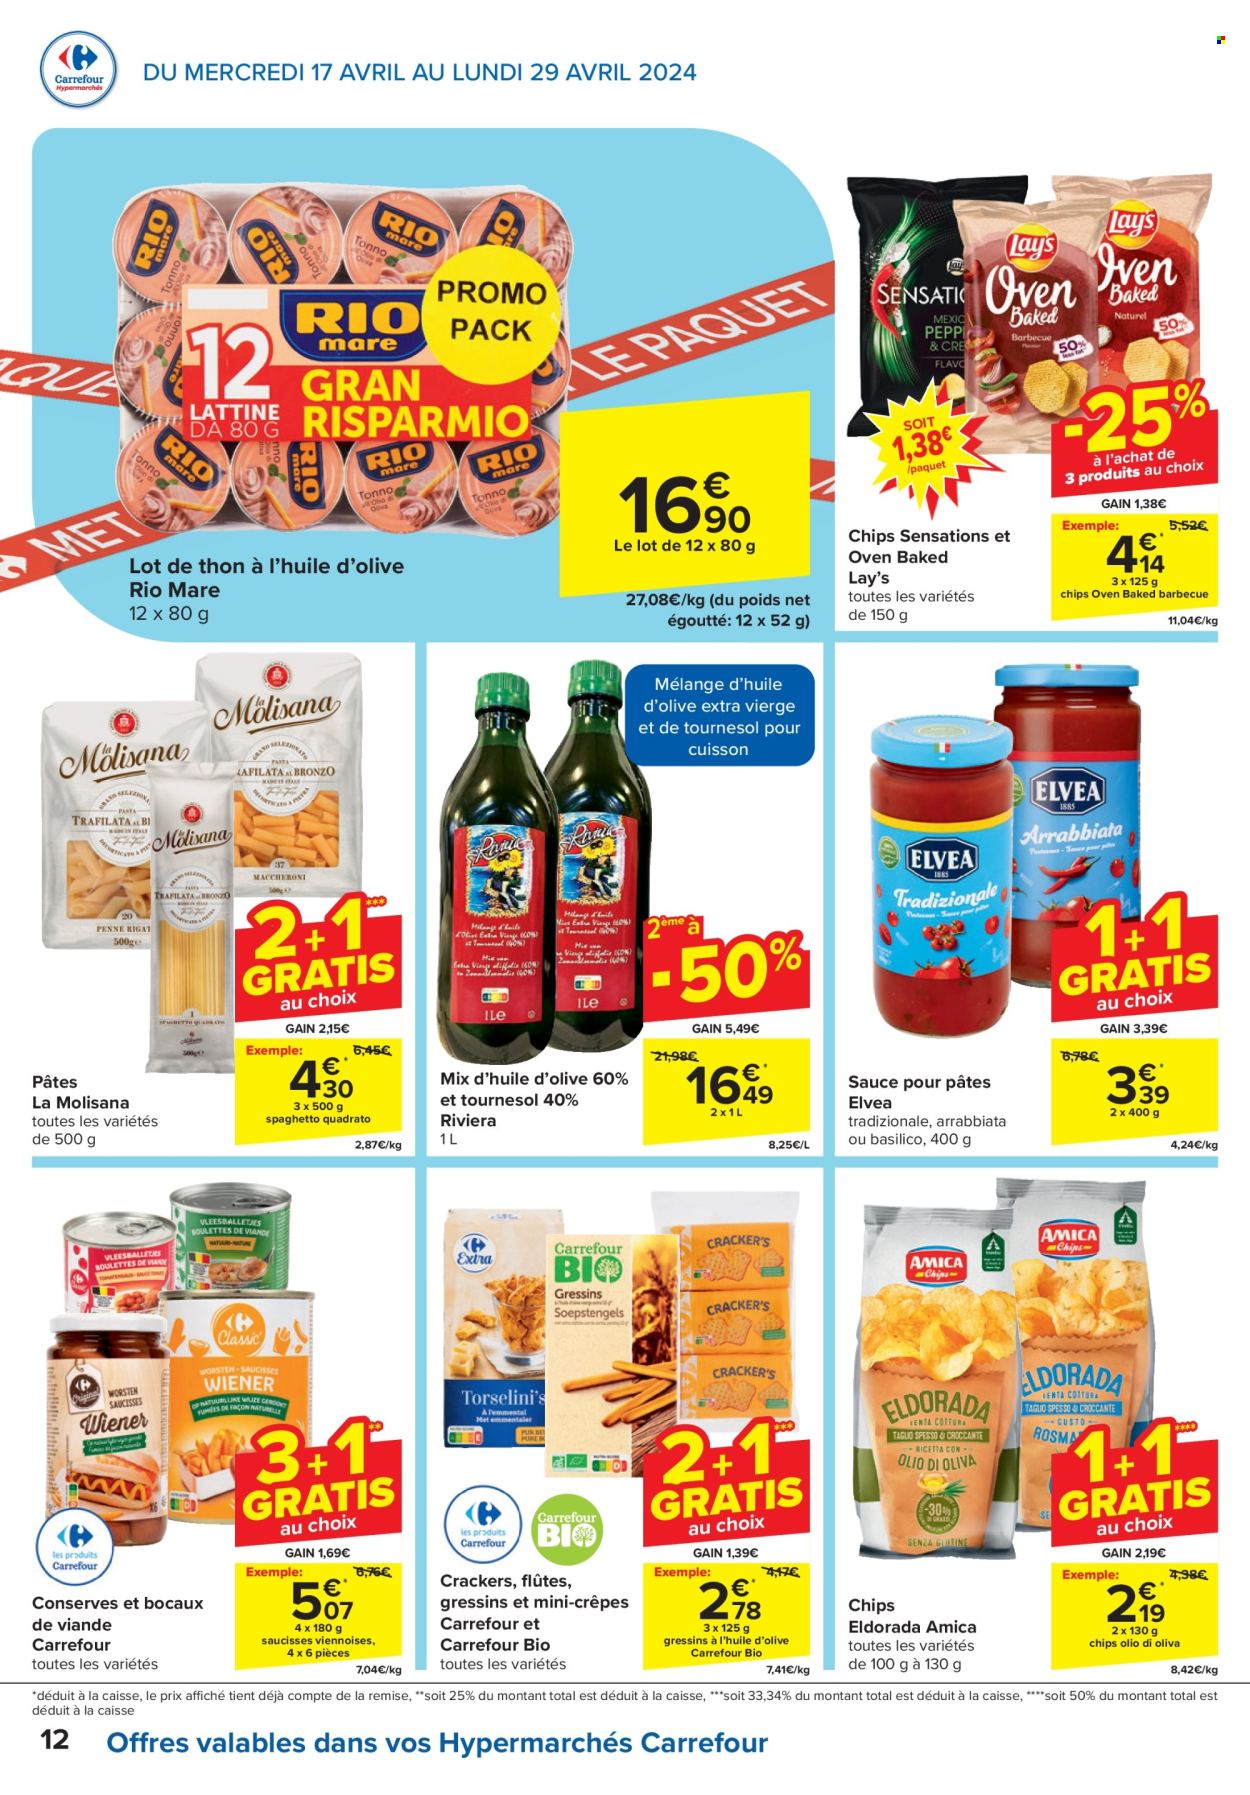 Catalogue Carrefour hypermarkt - 17.4.2024 - 29.4.2024. Page 12.